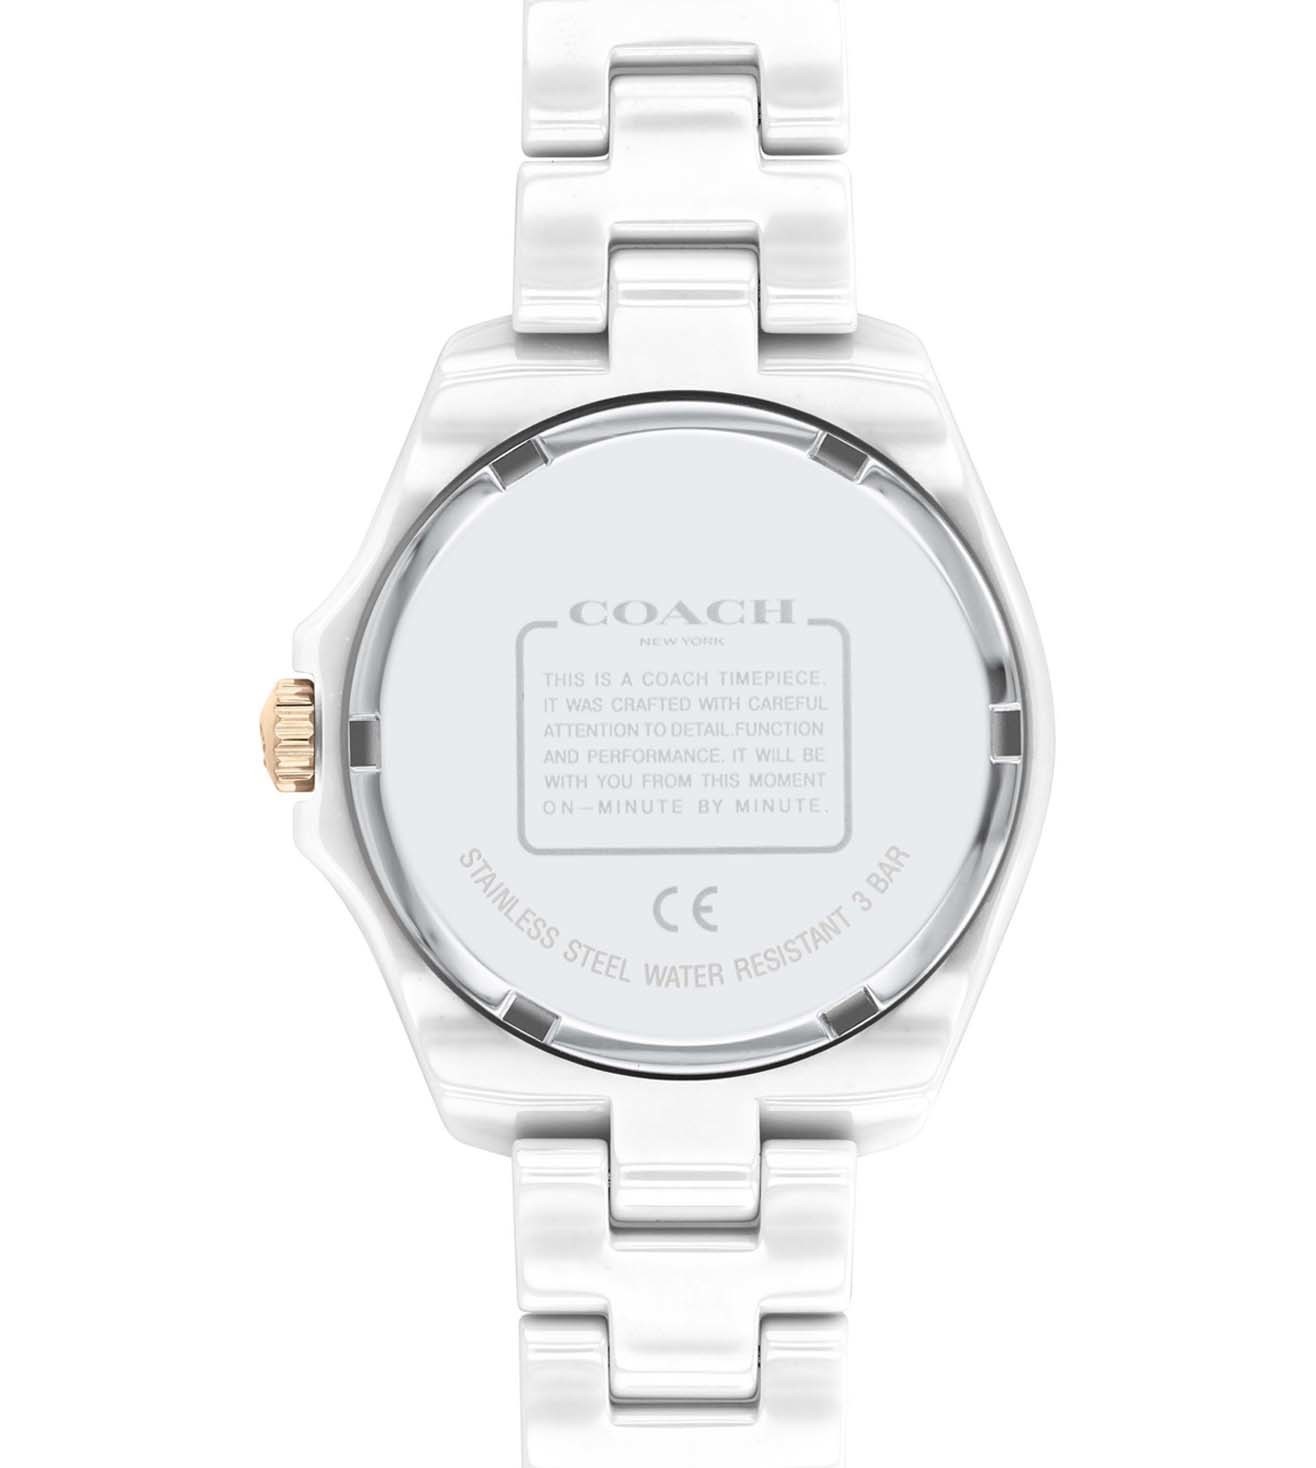 ĐỒNG HỒ NỮ COACH WOMENS 33.25 MM PRESTON MOTHER OF PEARL DIAL STAINLESS STEEL ANALOGUE WATCH 1